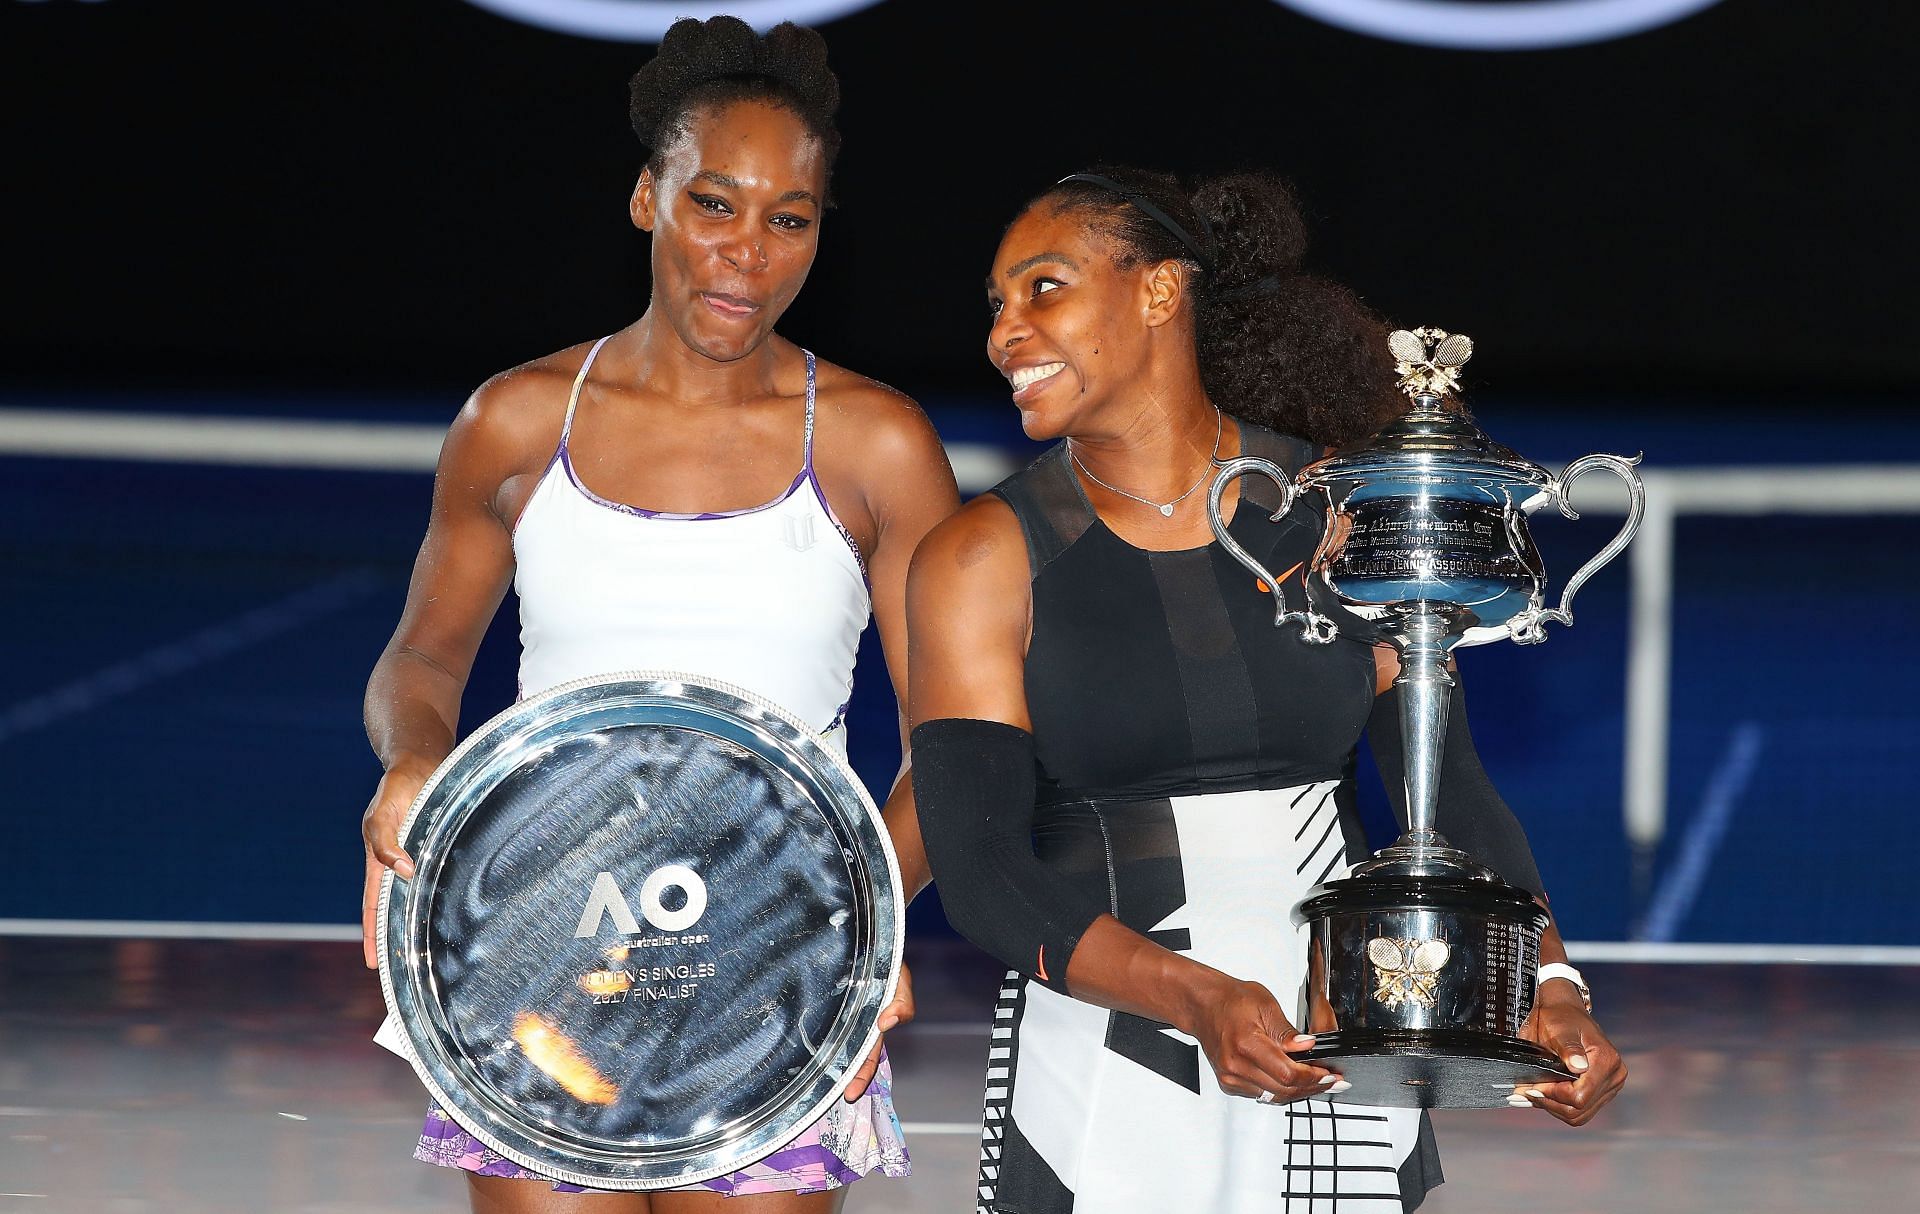 The 2022 edition of the Australian Open will be the first time the Slam is conducted without the Williams sisters since 1997